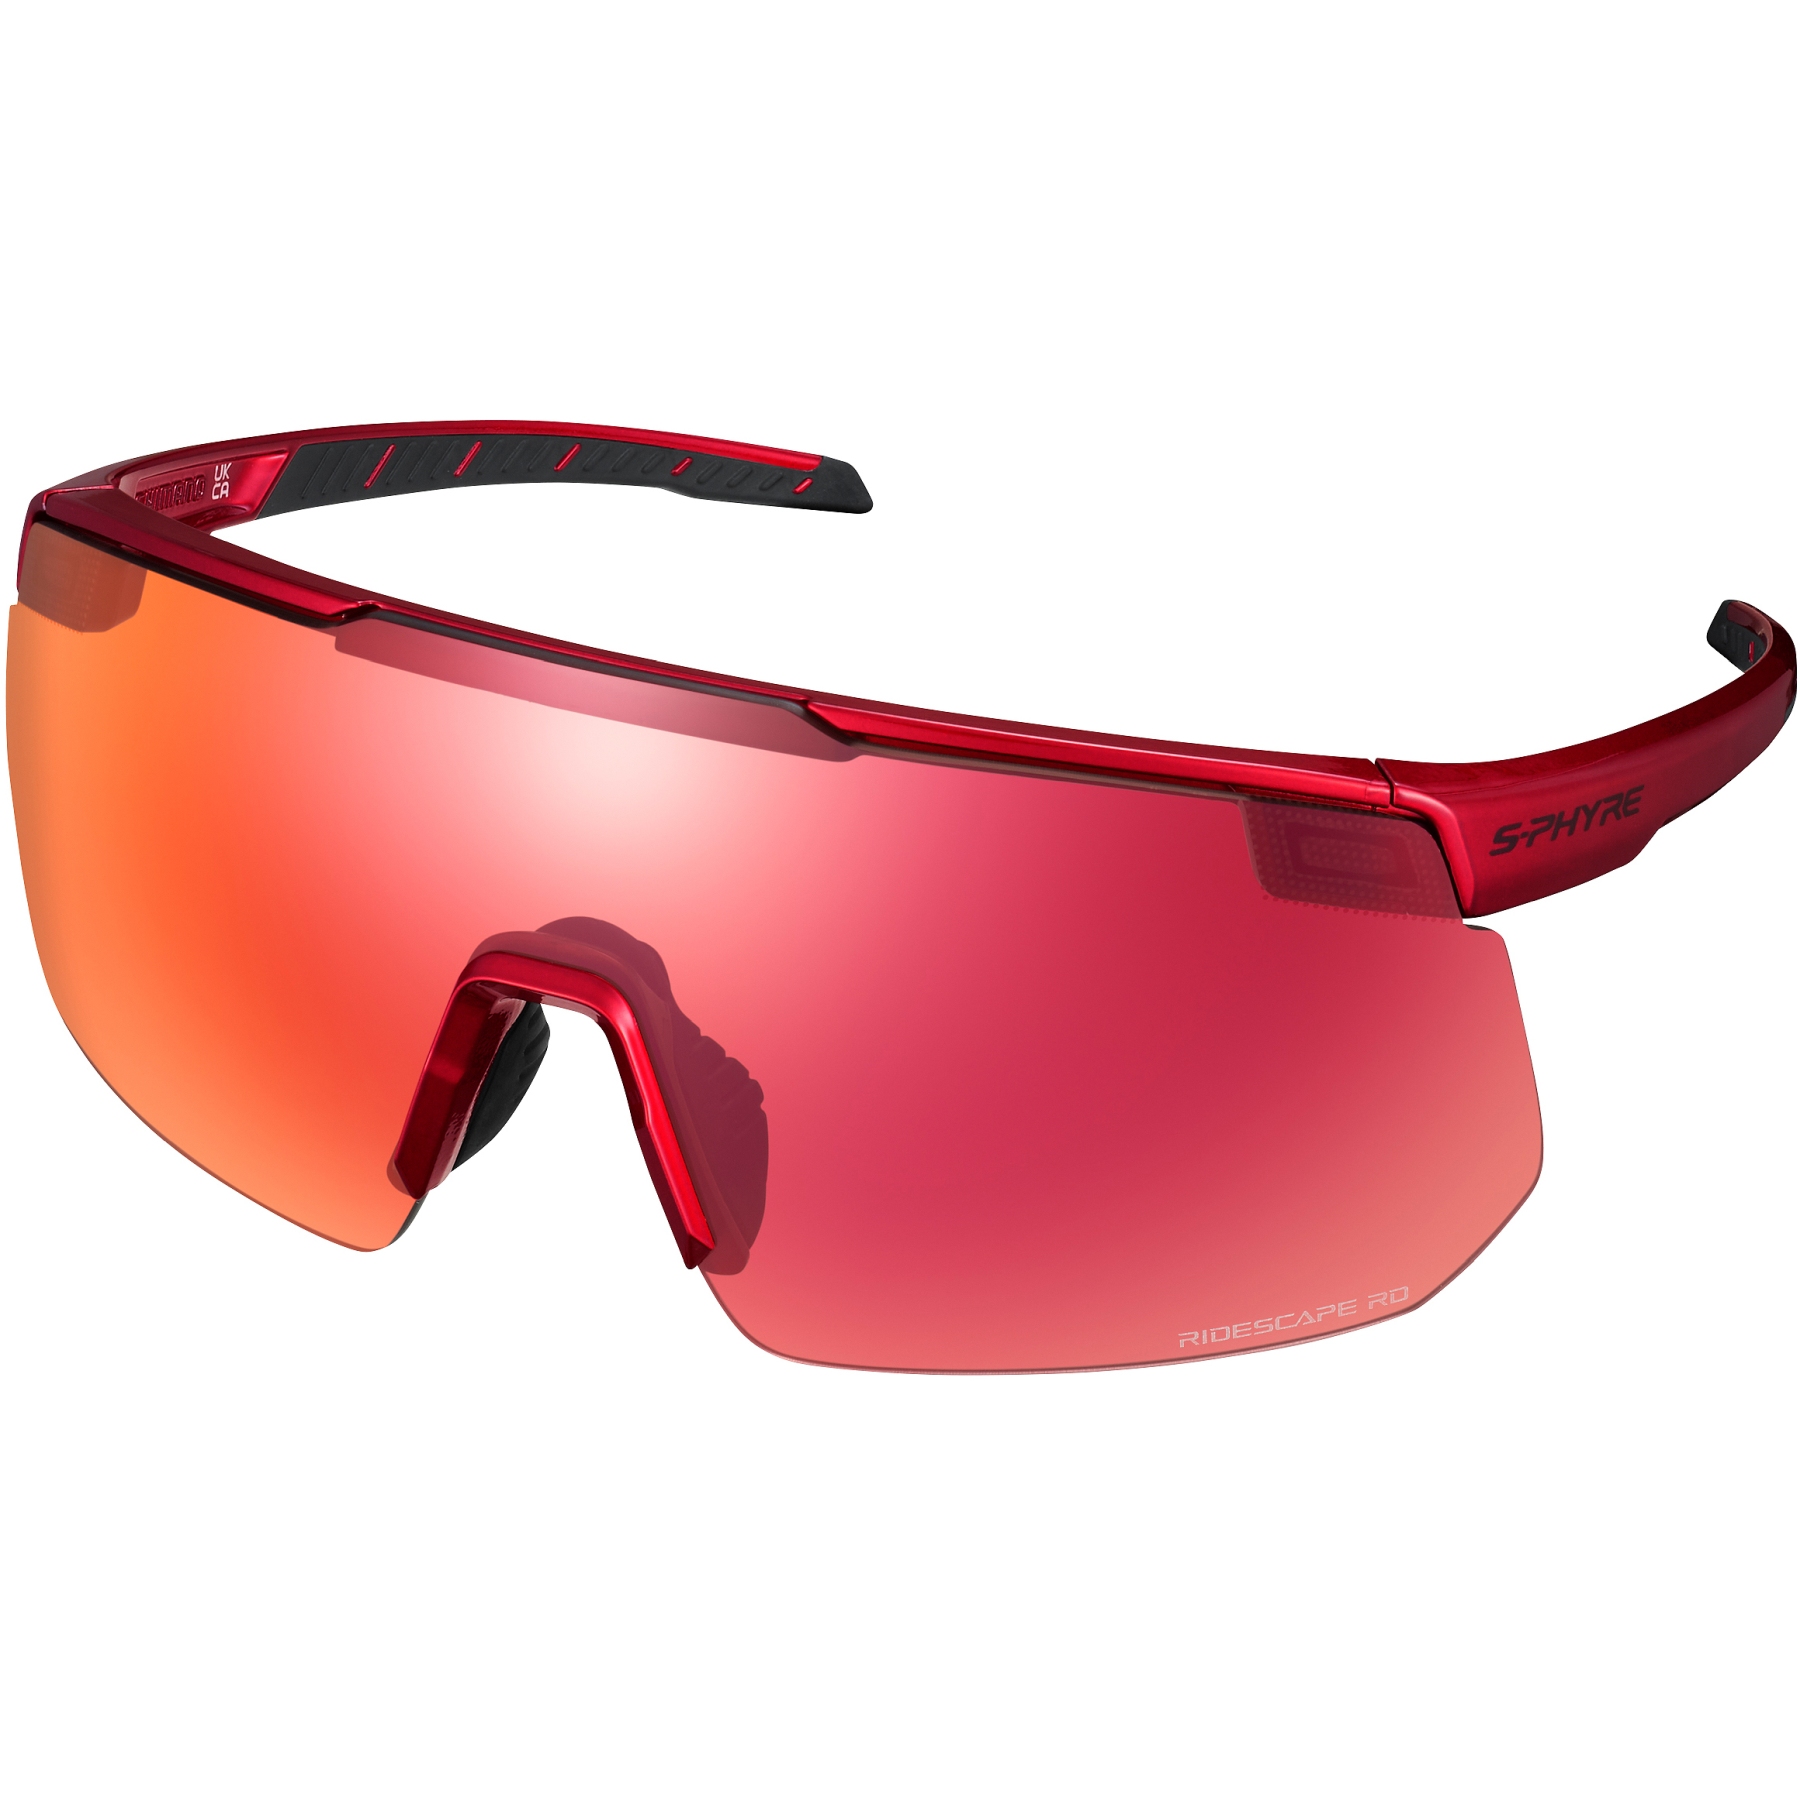 Picture of Shimano S-Phyre 2 Glasses - Metallic Red - Ridescape Road / Clear